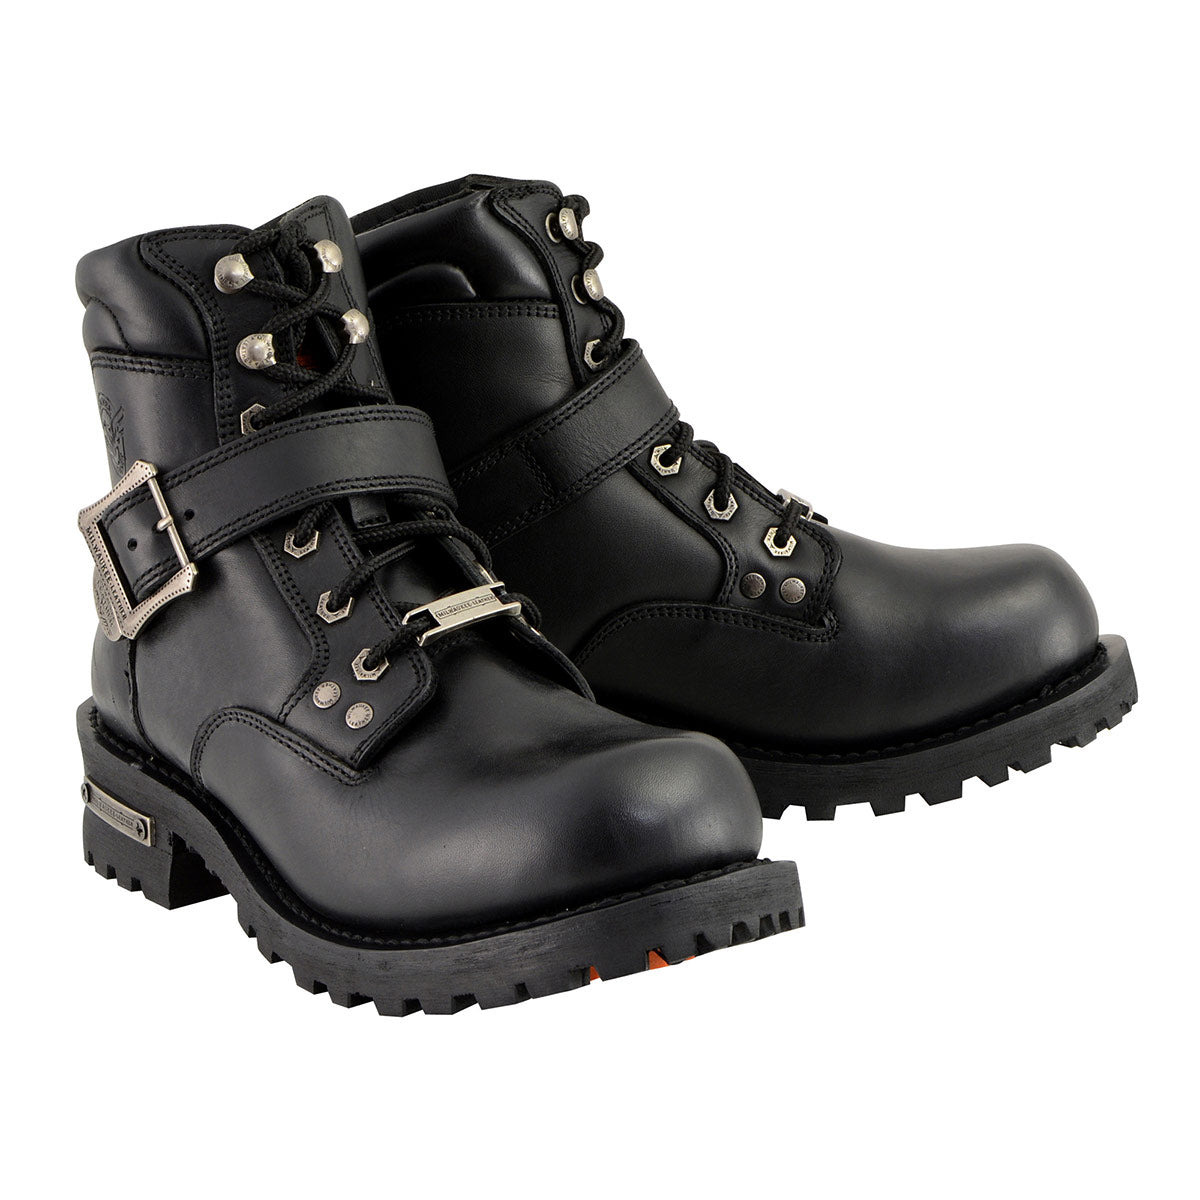 Wholesale Motorcycle Engineer Boots – Motorcyclecenter.com